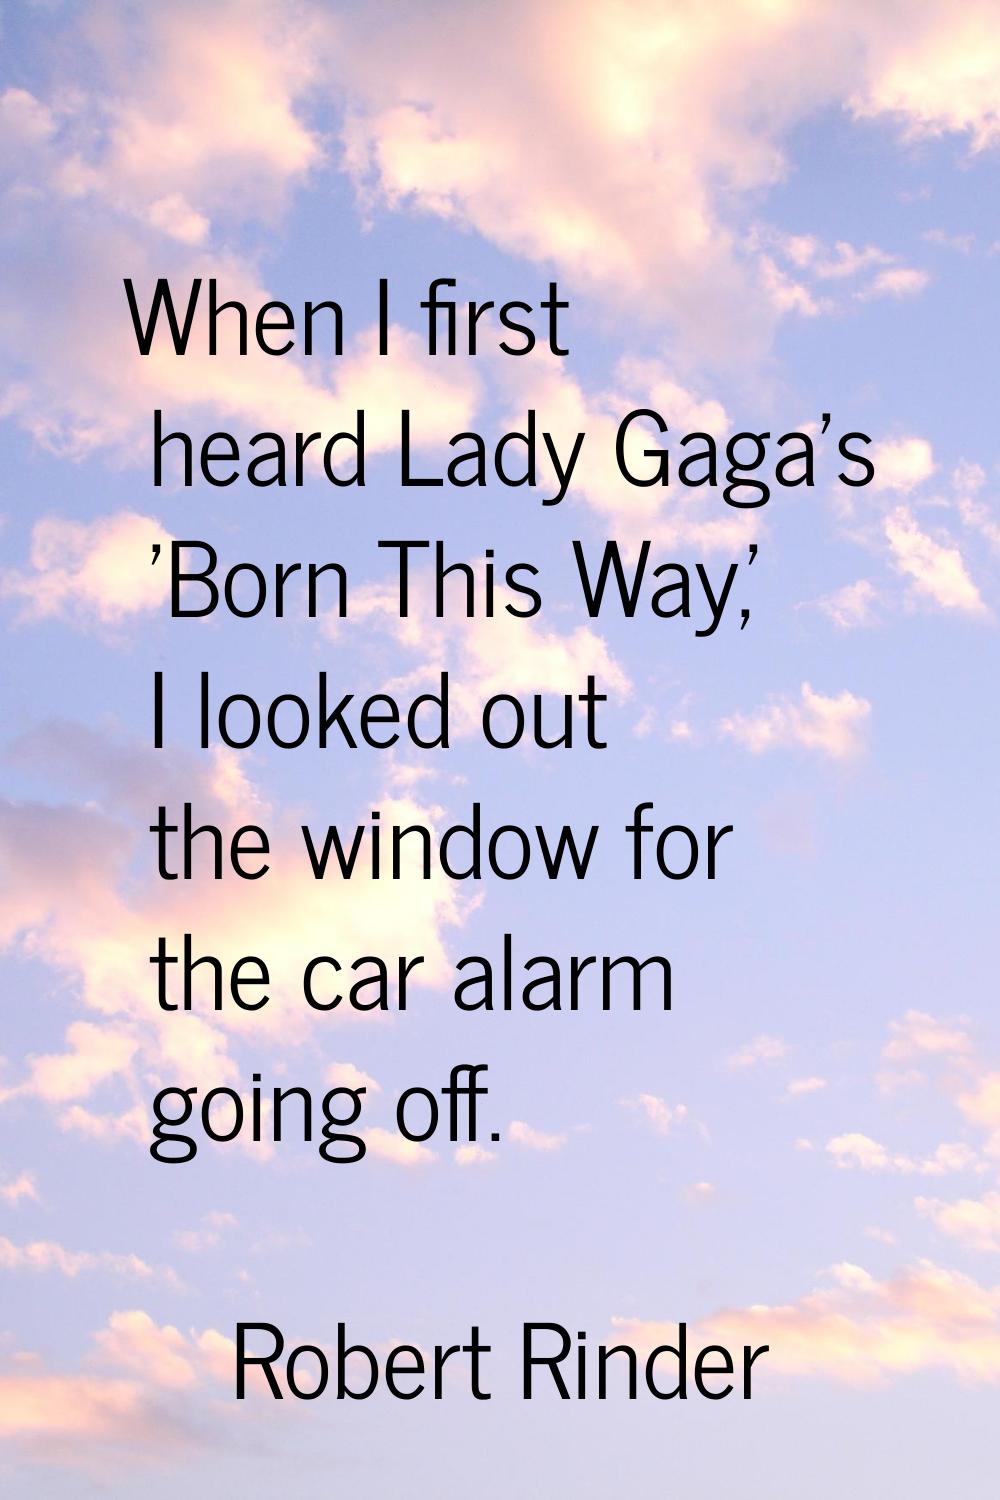 When I first heard Lady Gaga's 'Born This Way,' I looked out the window for the car alarm going off